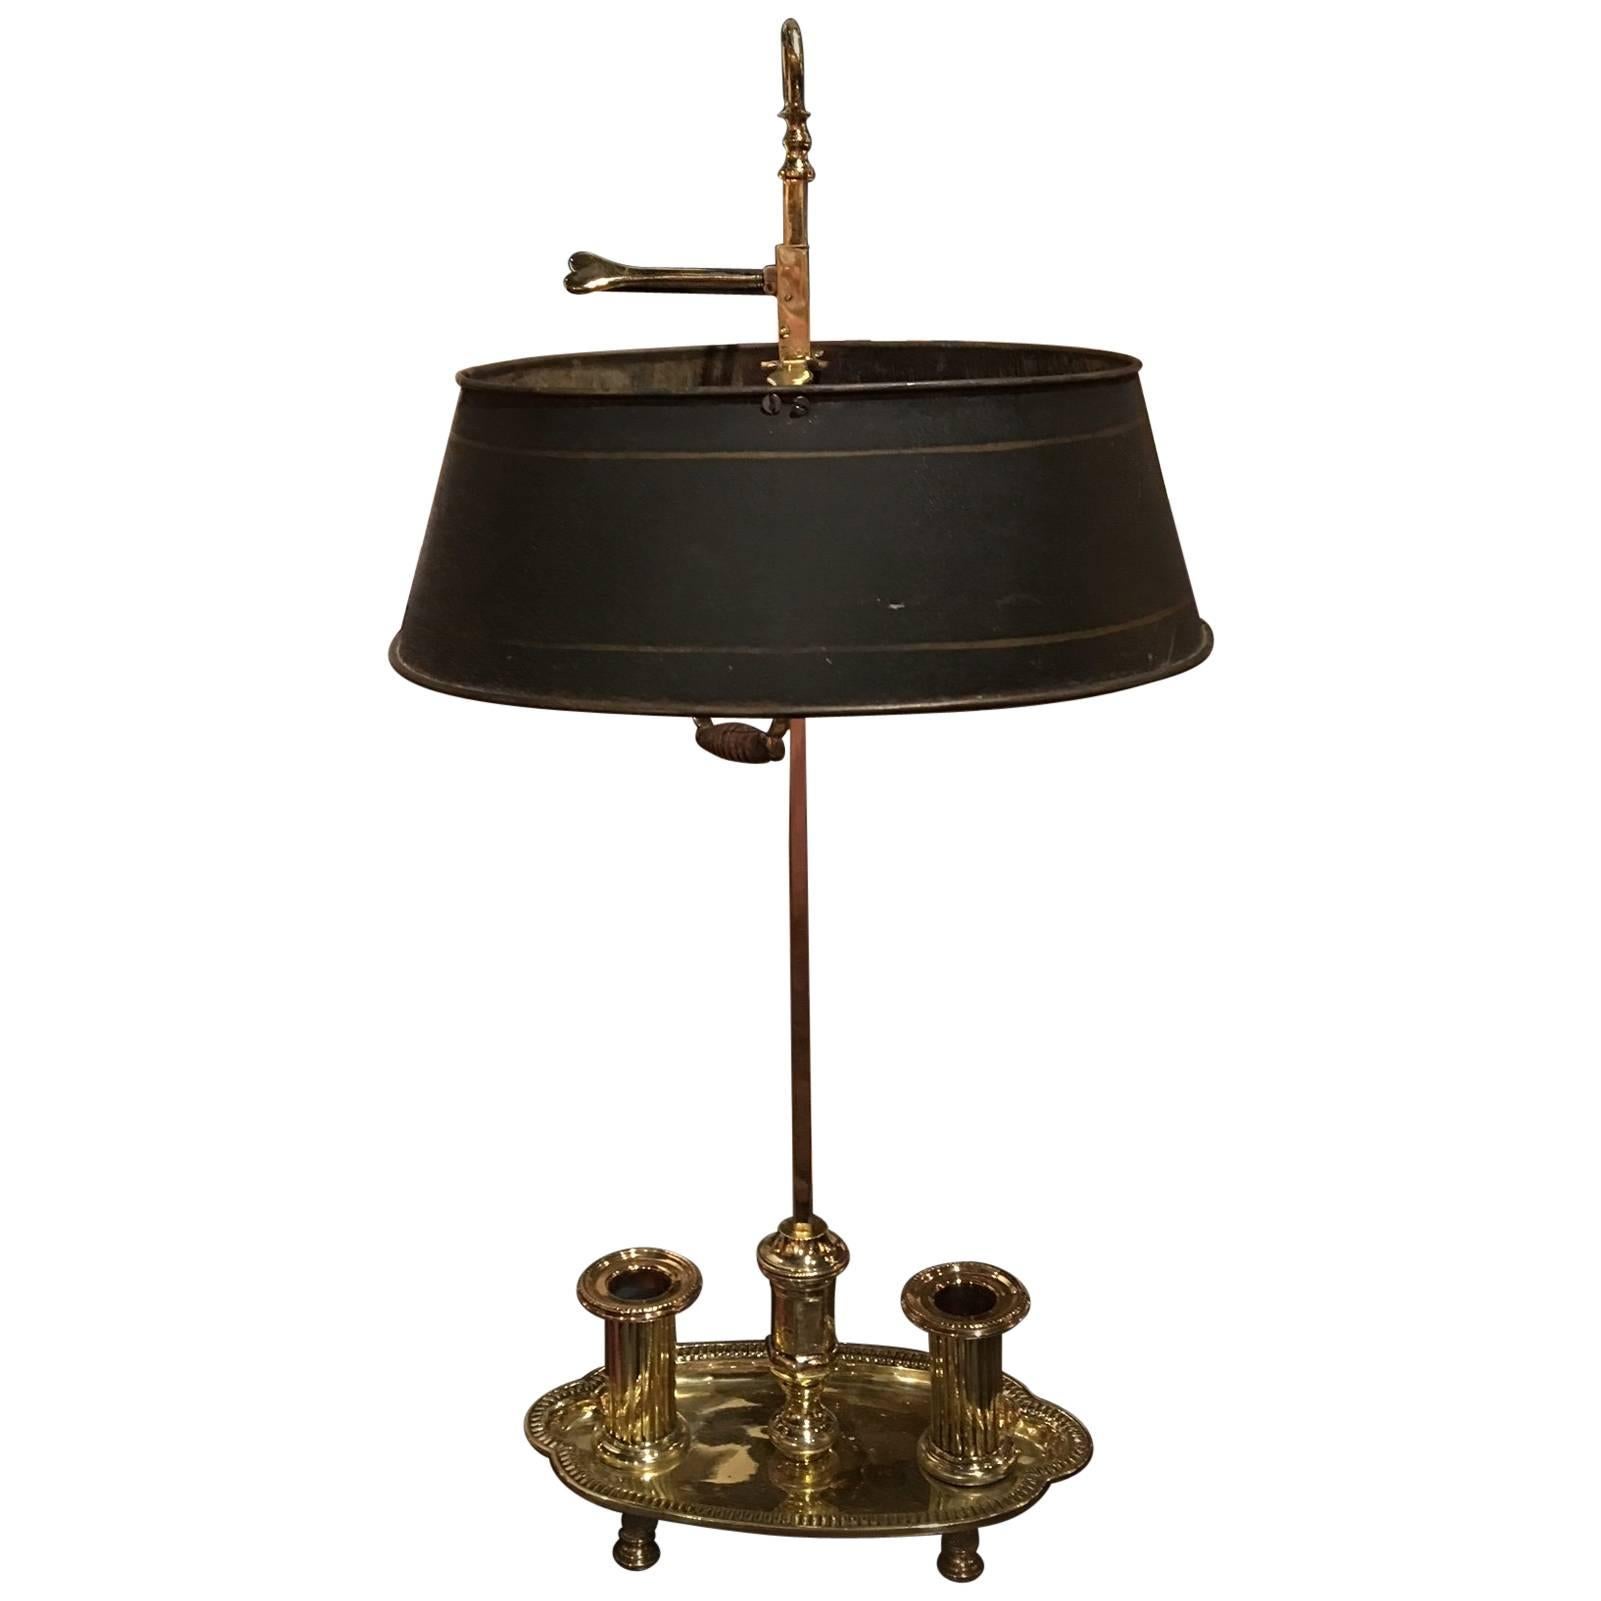 French Polished Brass Bouillotte Lamp with Metal Shade, 19th Century